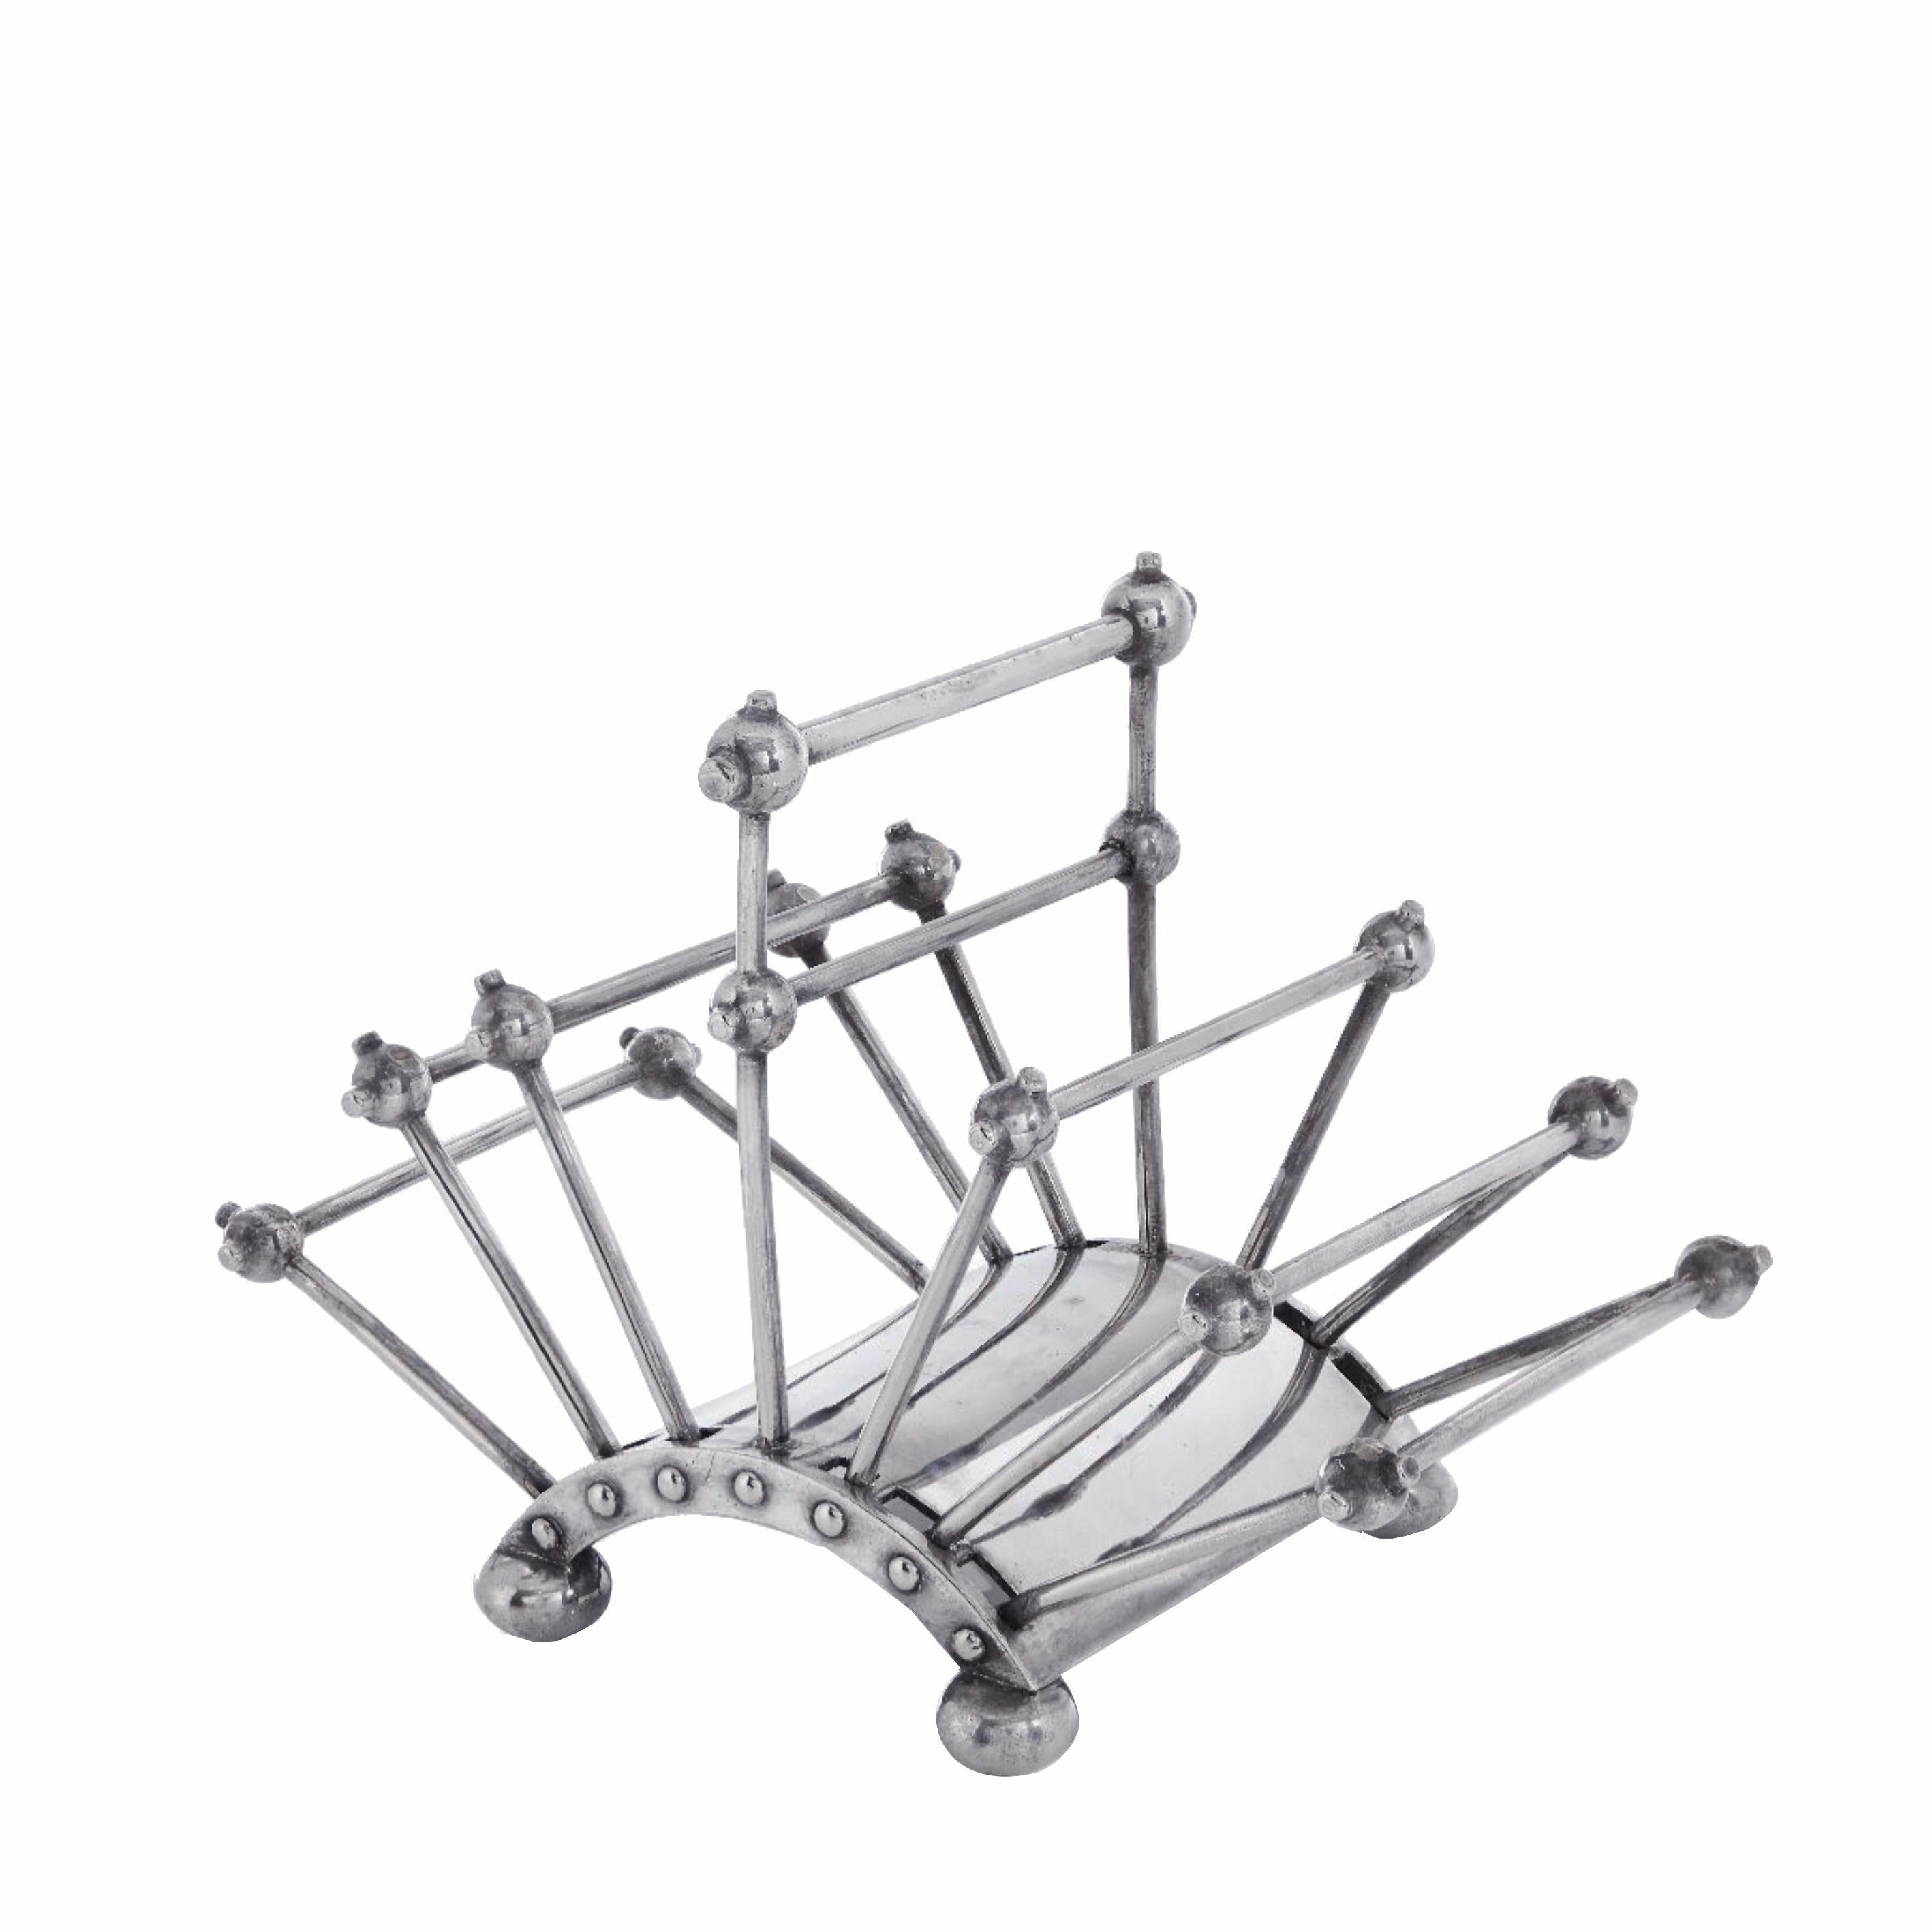 Silver-plated letter folding rack, designed by Christopher Dresser circa 1880 and manufactured by Hukin & Heath, Birmingham circa 1881, in a toast rack form with one central fixed division and six flanking moveable divisions on an arched base and